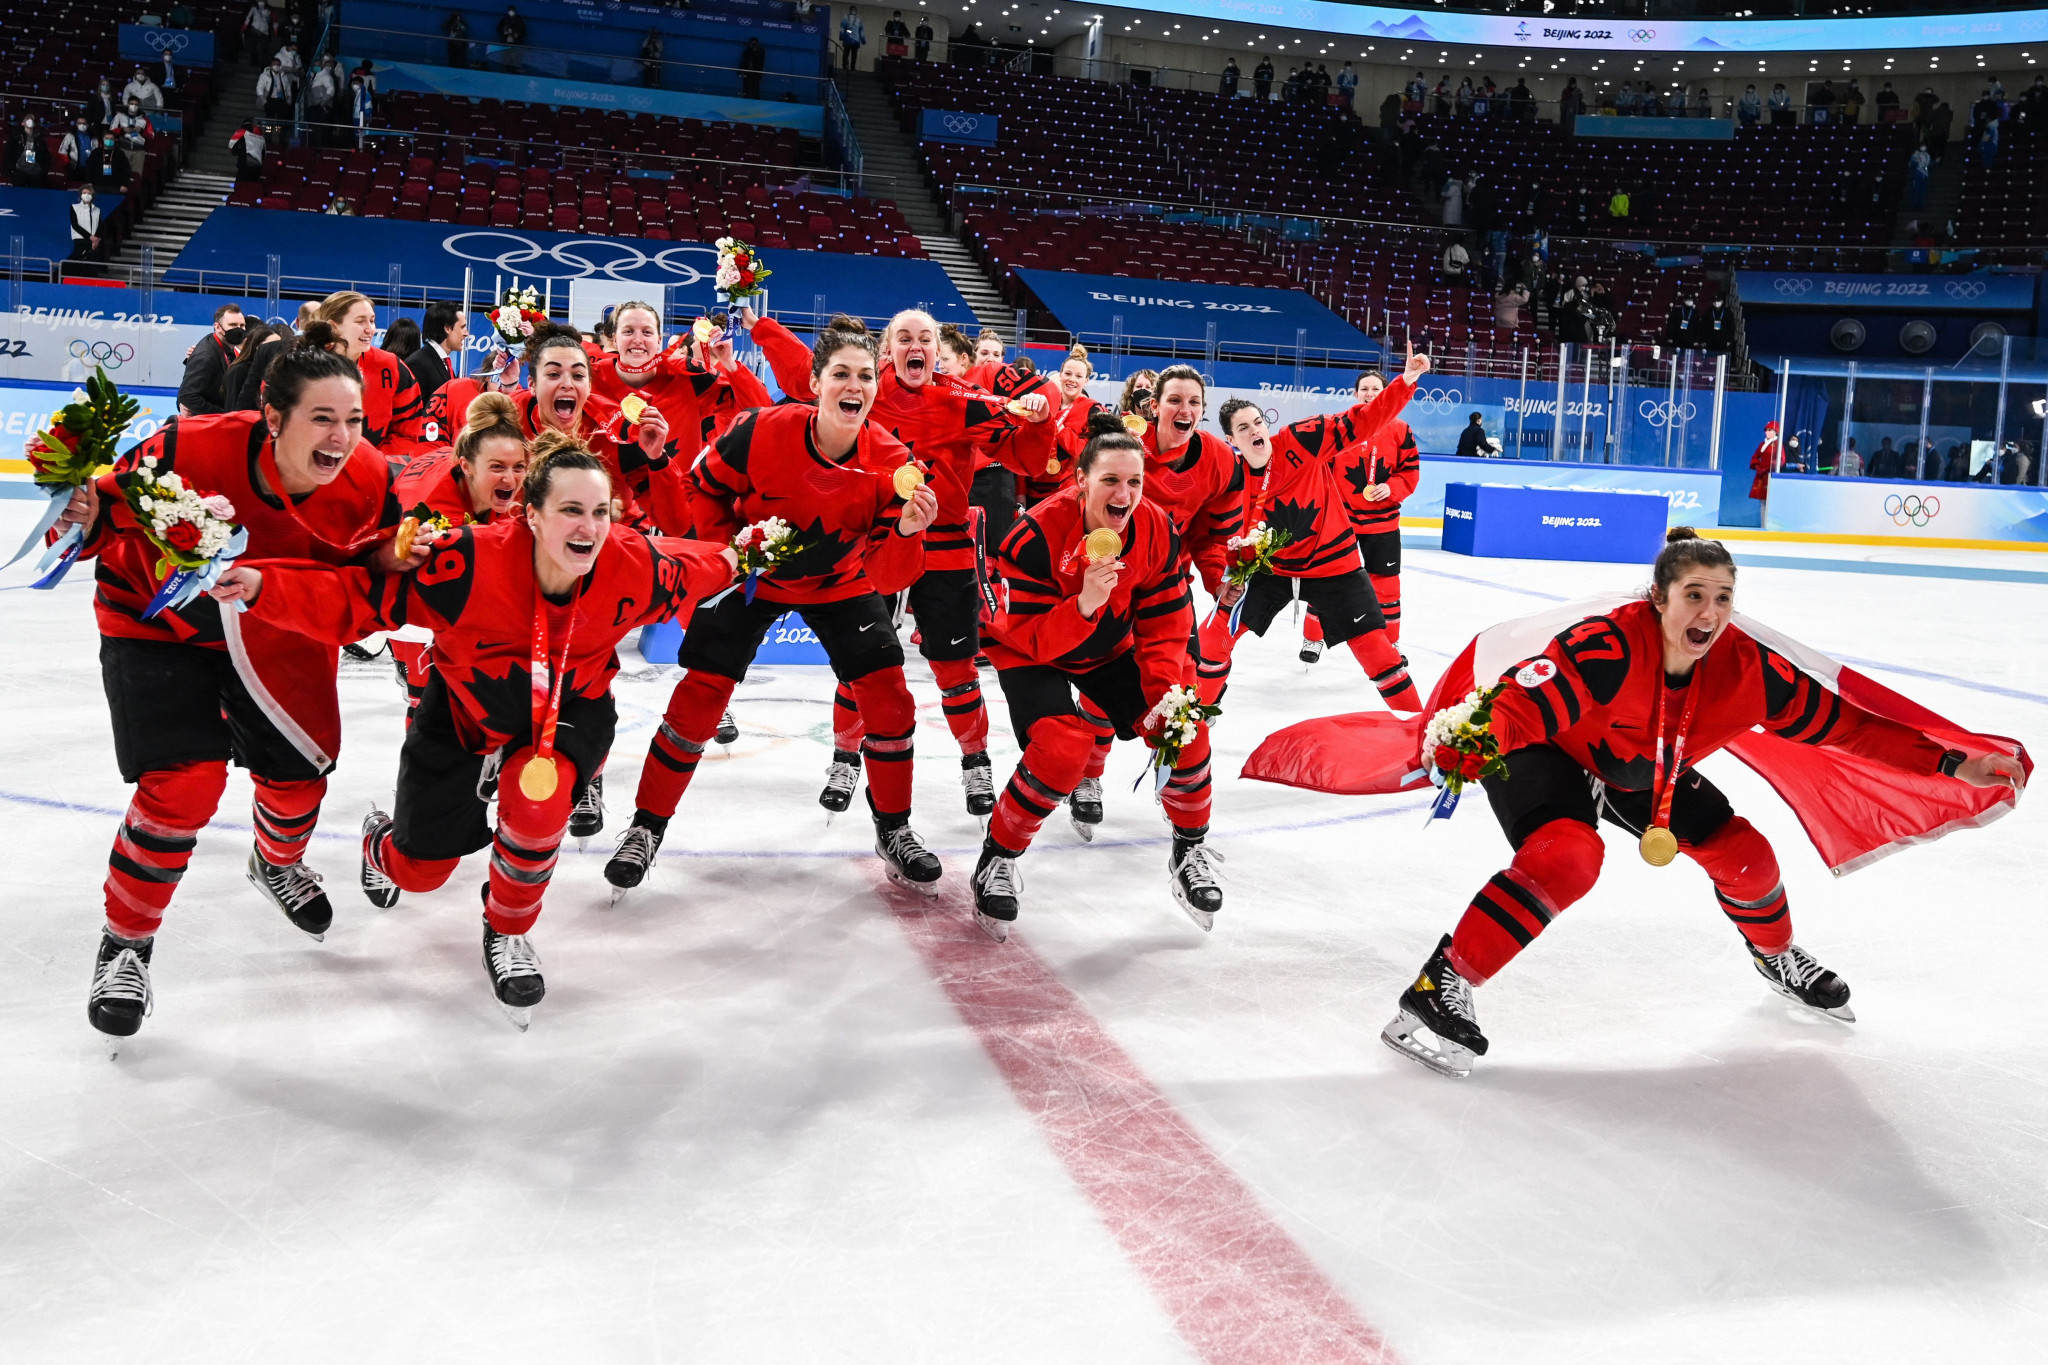 Canada win women's ice hockey gold with tight victory over old rivals United States